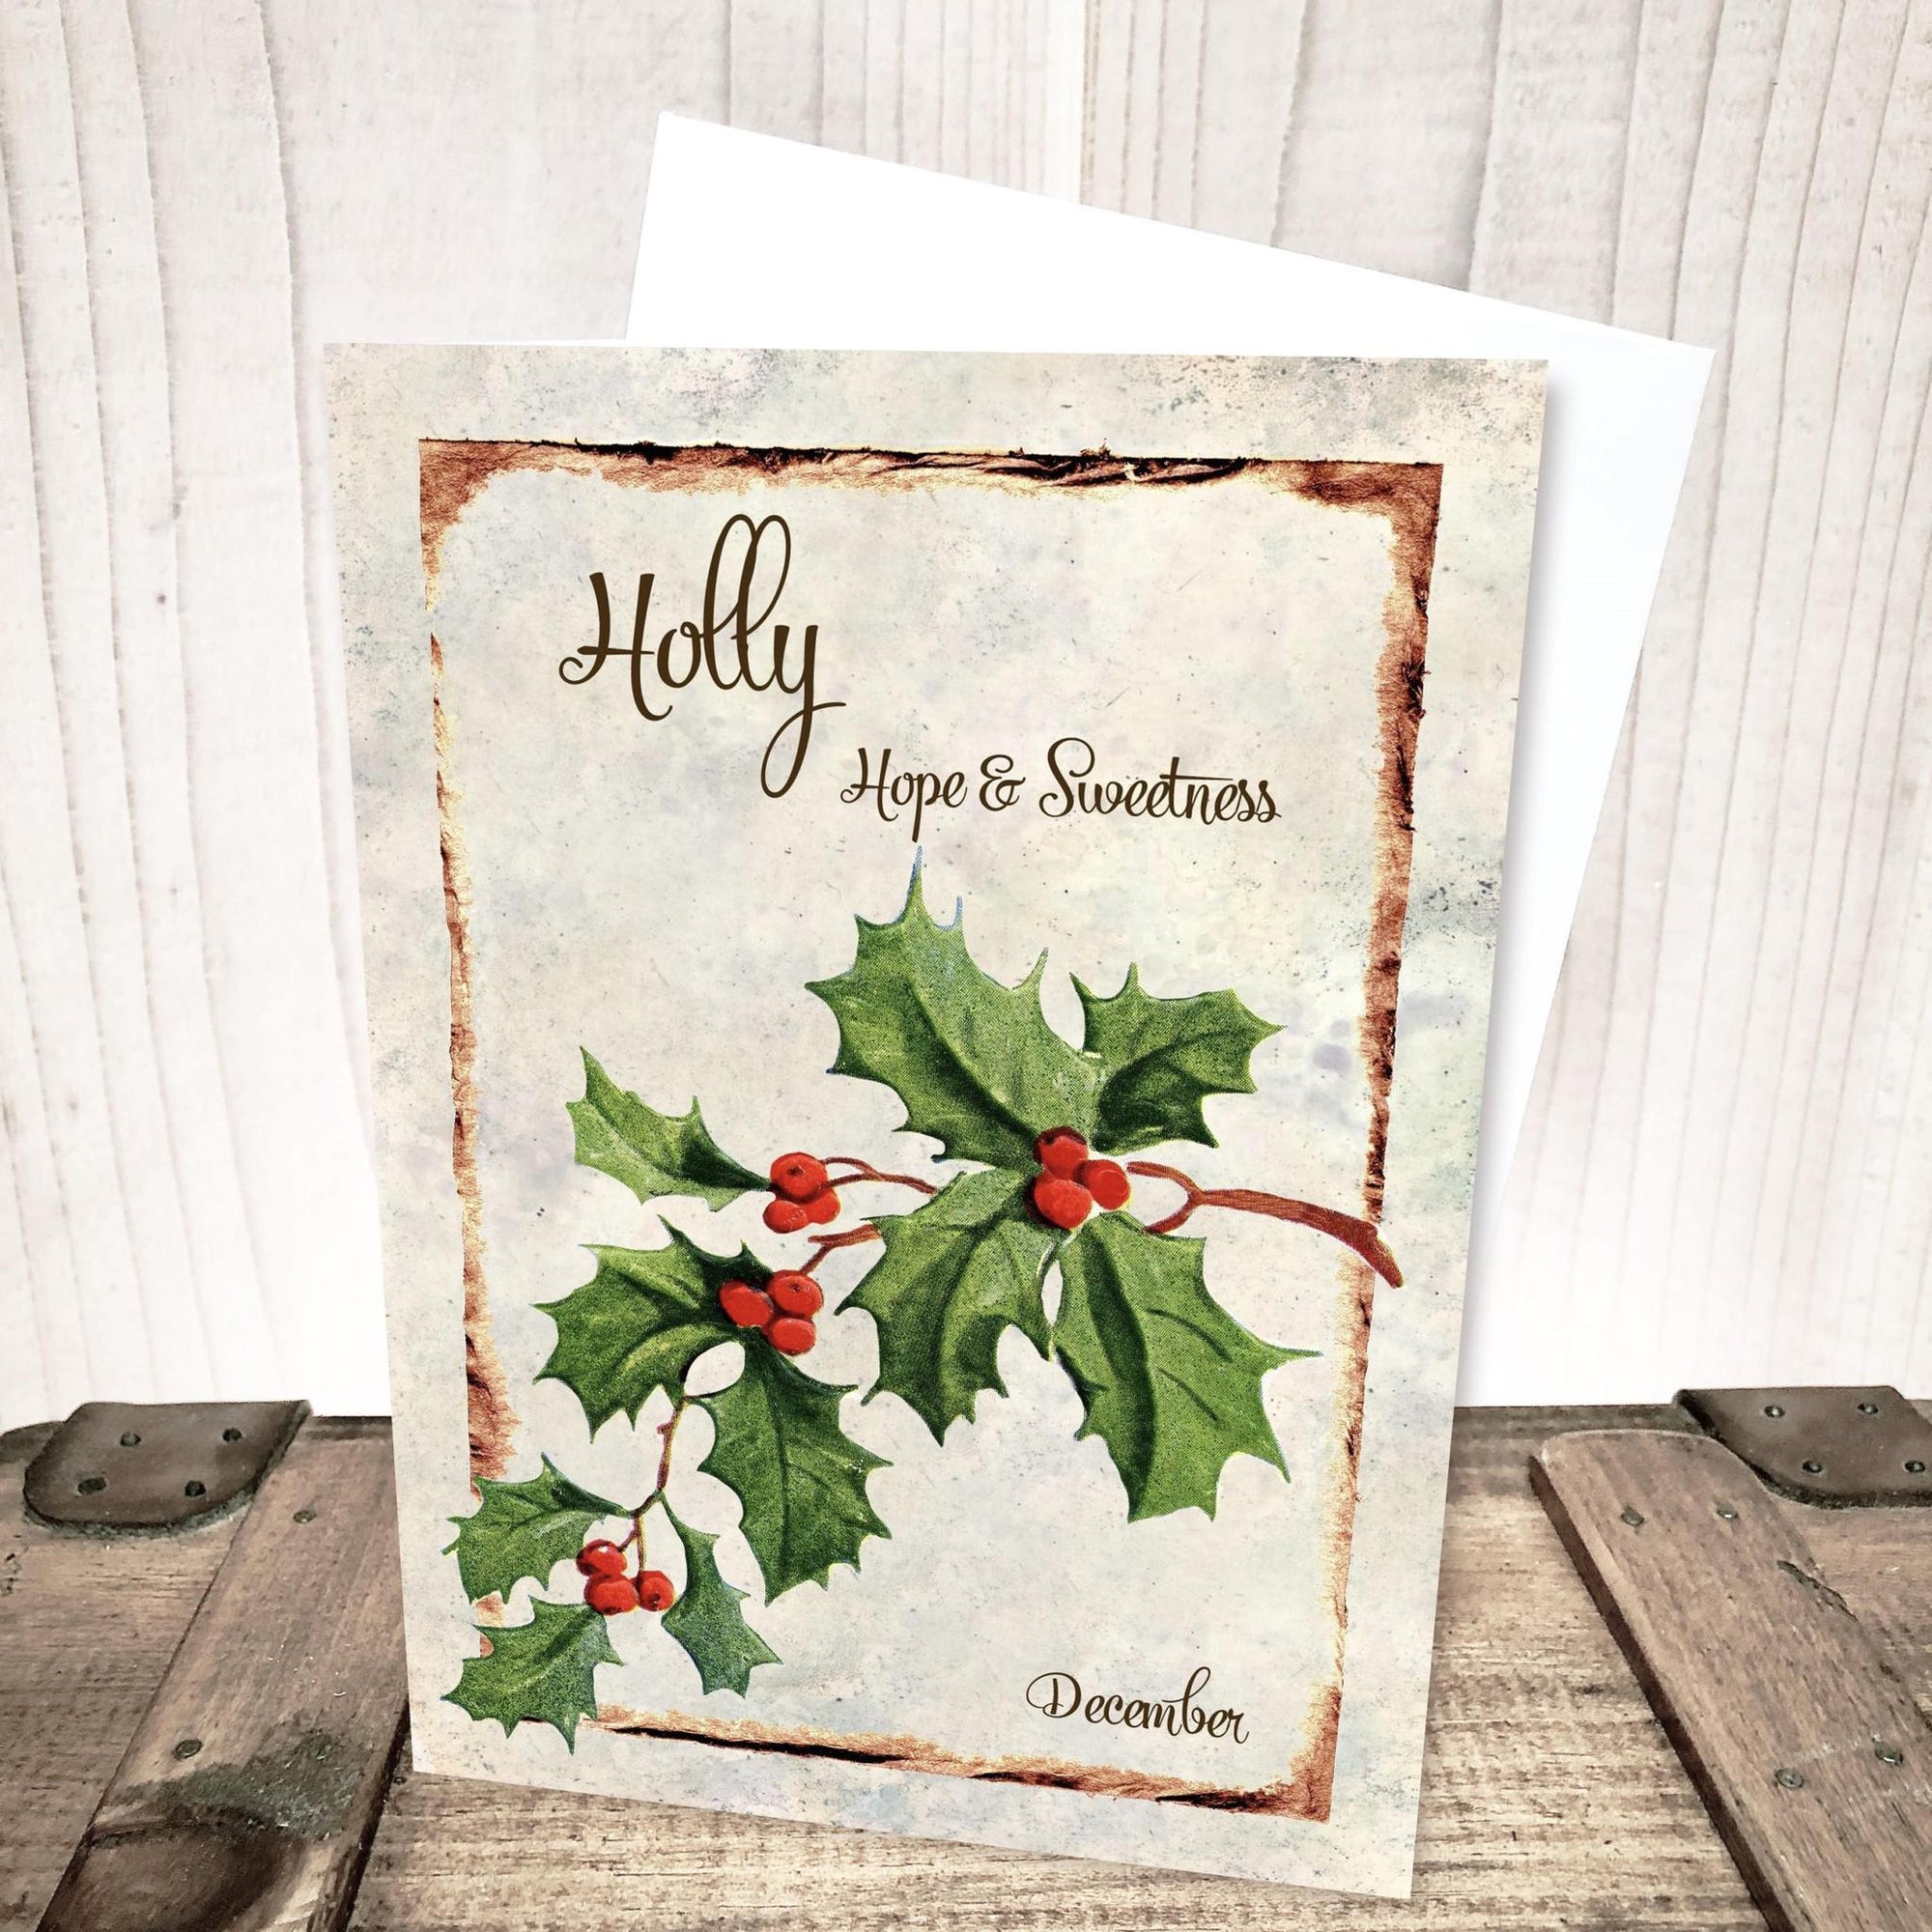 December Holly Flower Card by Yesterday's Best